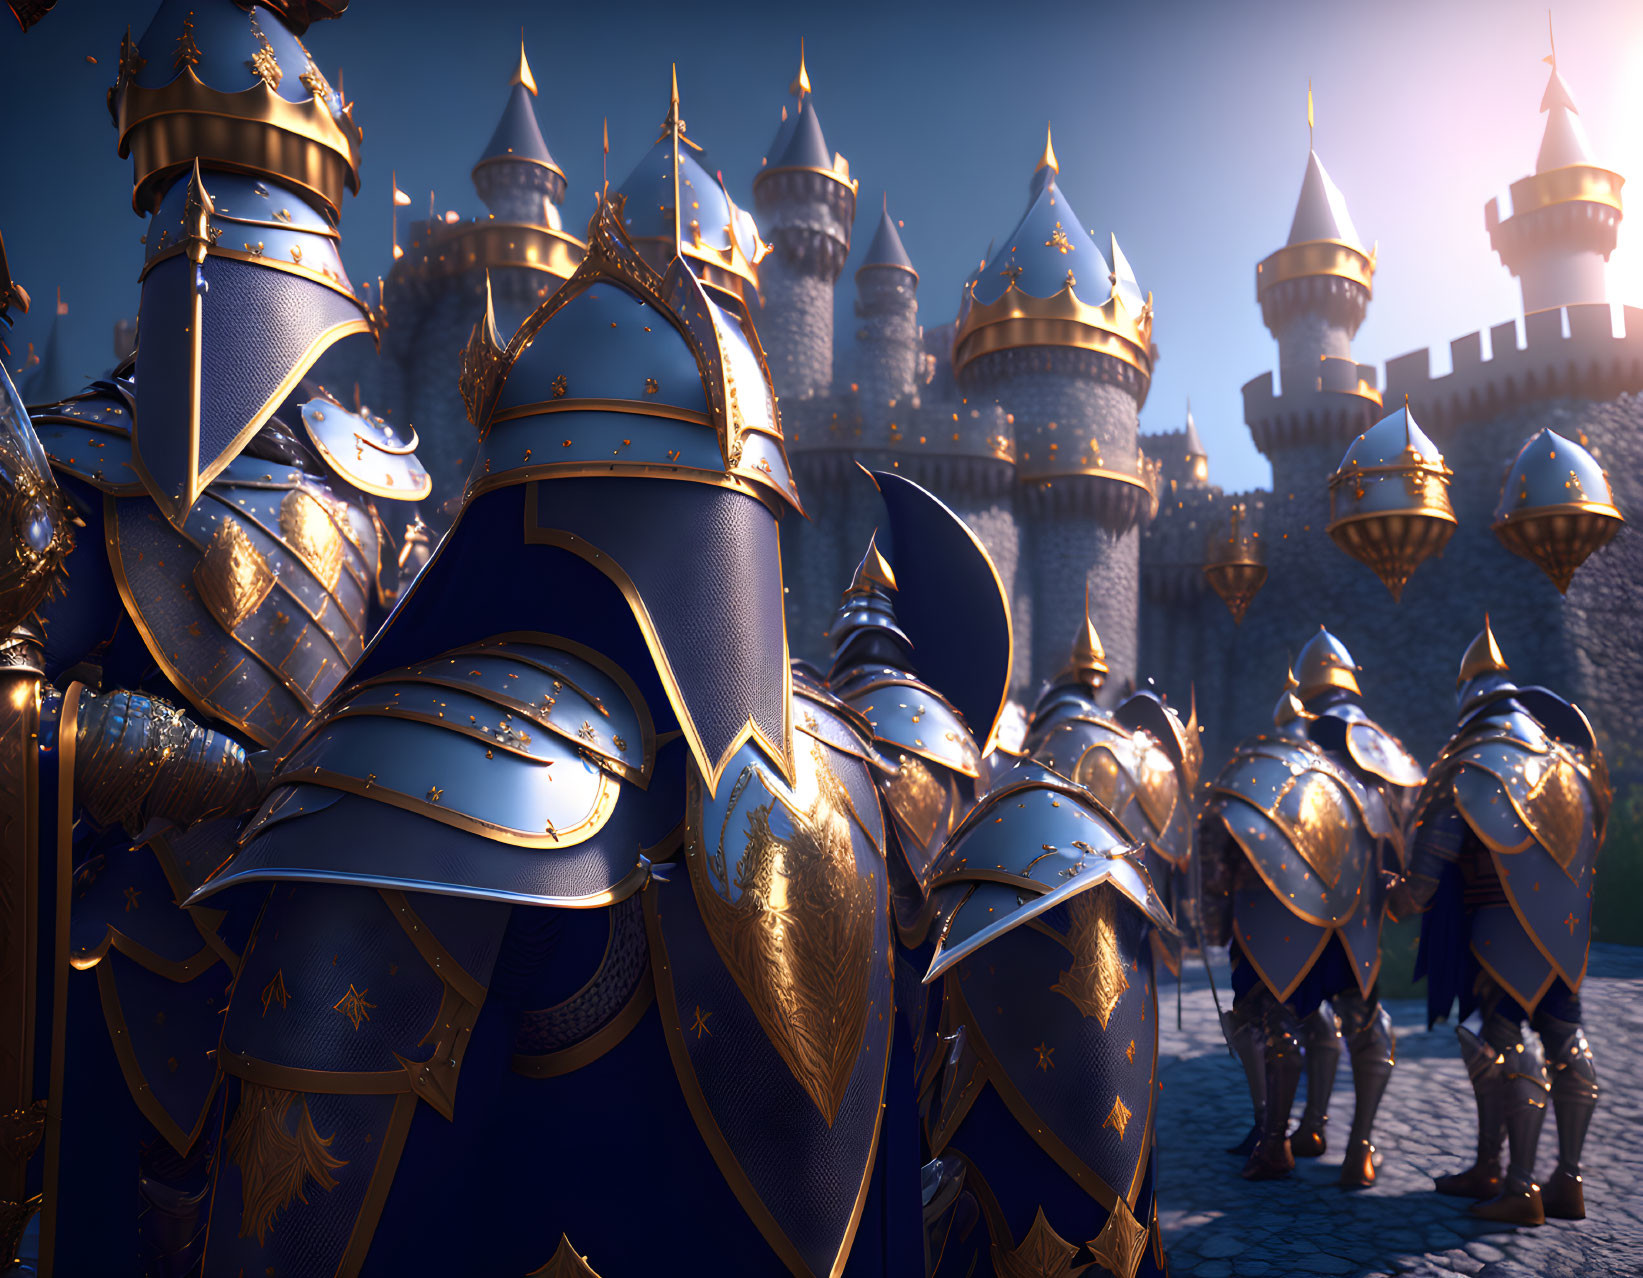 Knights in Blue and Gold Armor Before Castle with Spires